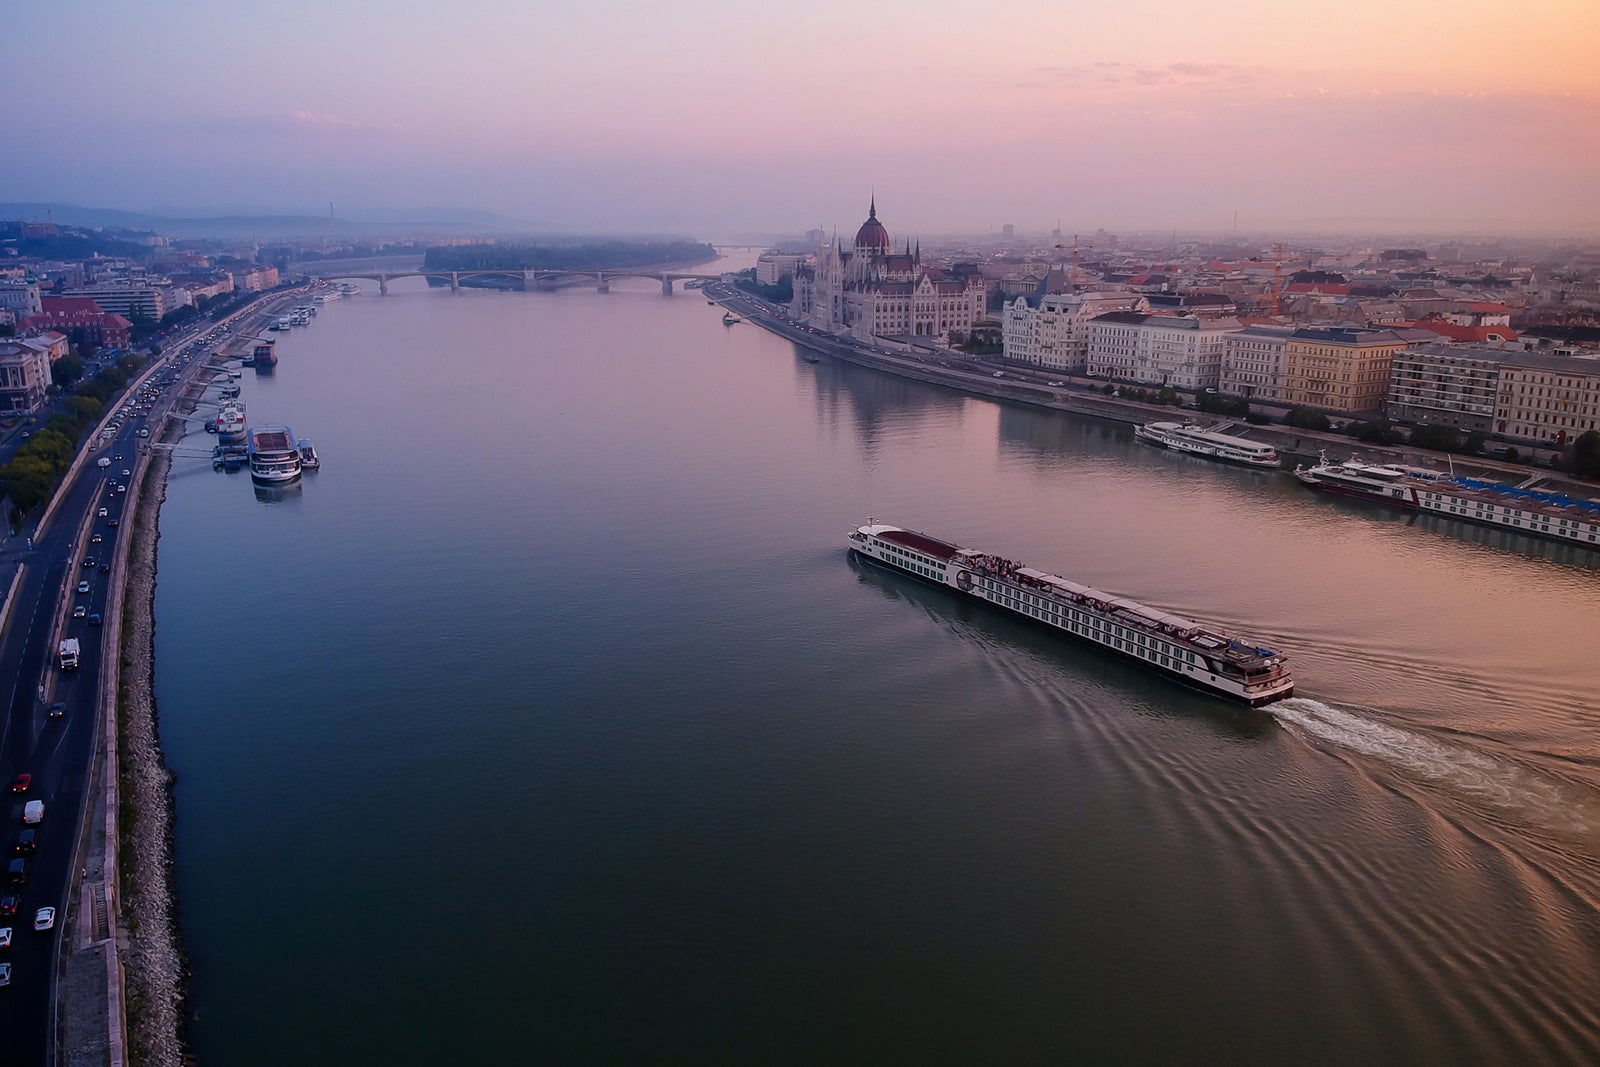 A river cruise going past the Hungarian Parliament Building in an early morning.